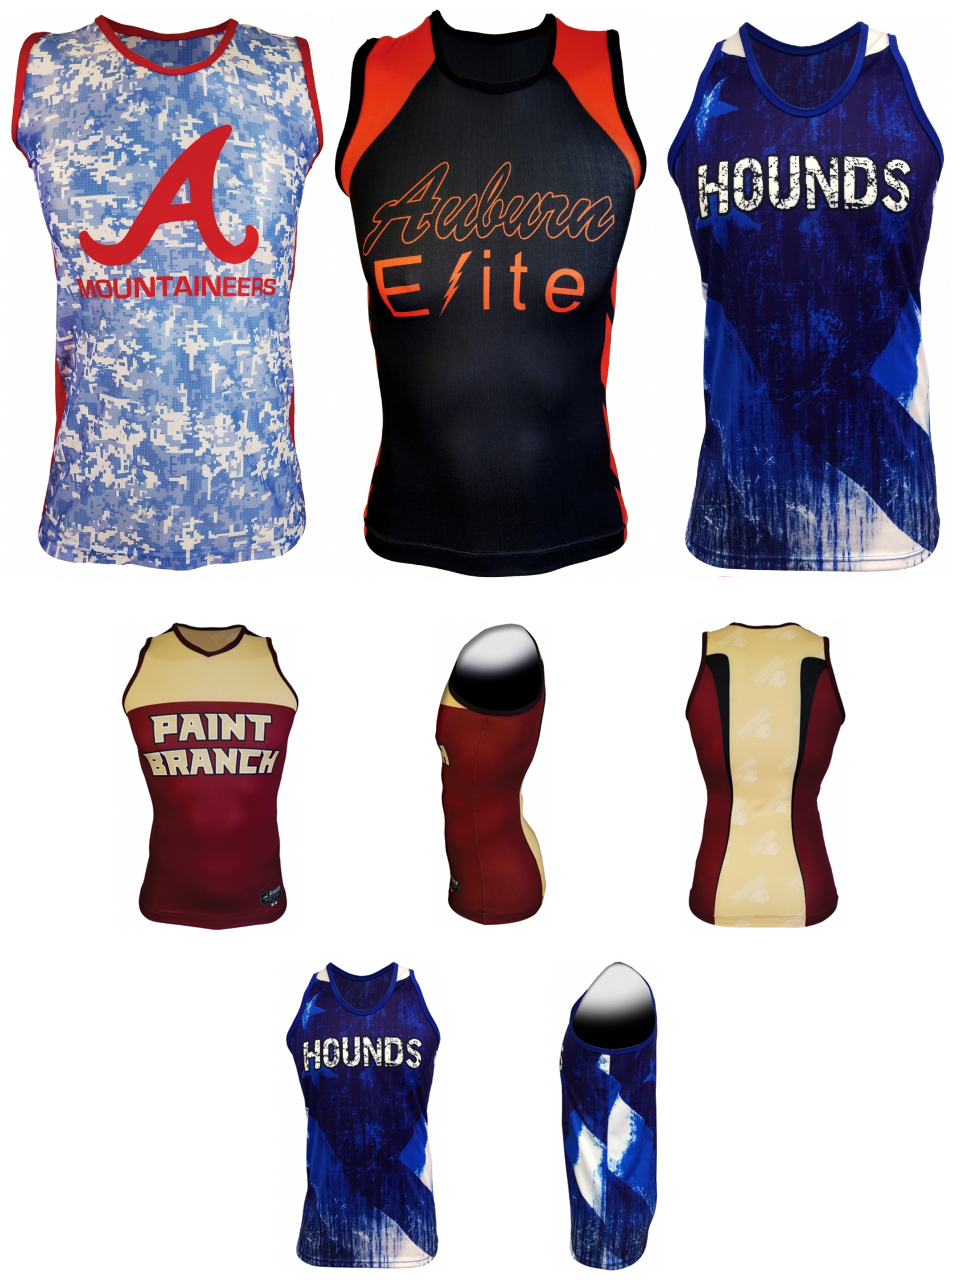 13 Track & Field Uniforms ideas  track uniforms, track and field, track